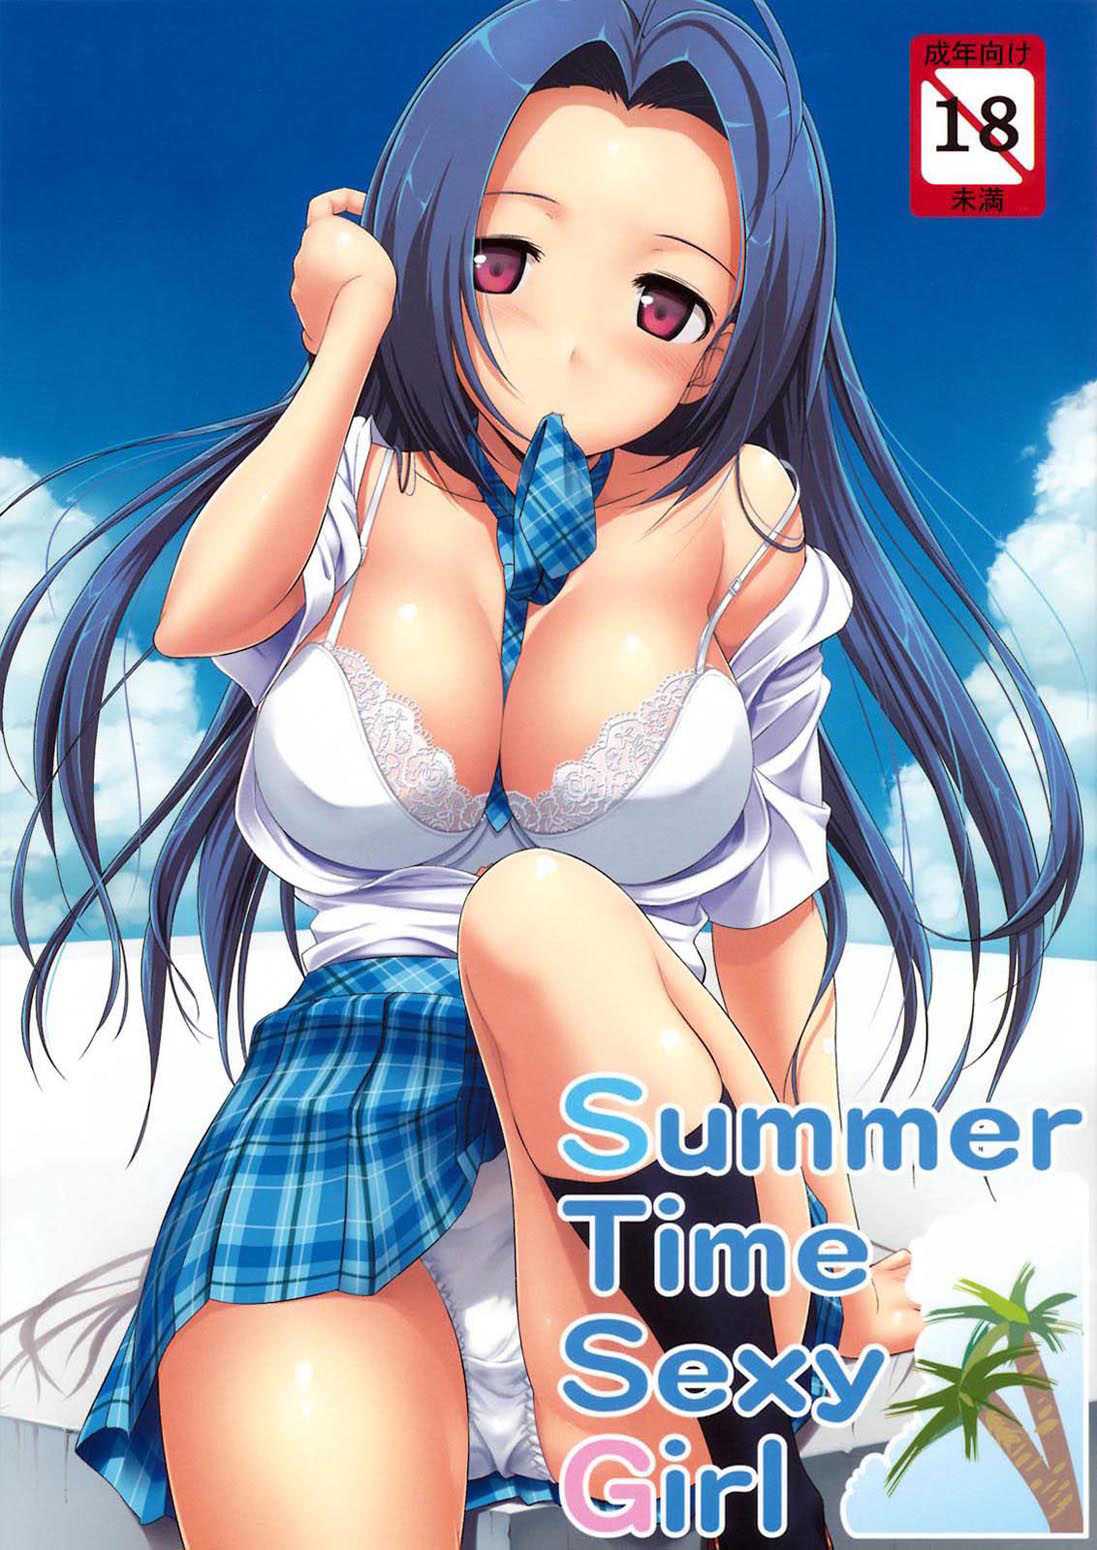 [Jenoa Cake] Summer Time Sexy Girl (THE iDOLM@STER) (CN) (C76) (同人誌) [じぇのばけーき(たかやKi)] Summer Time Sexy Girl (THE IDOLM@STER)